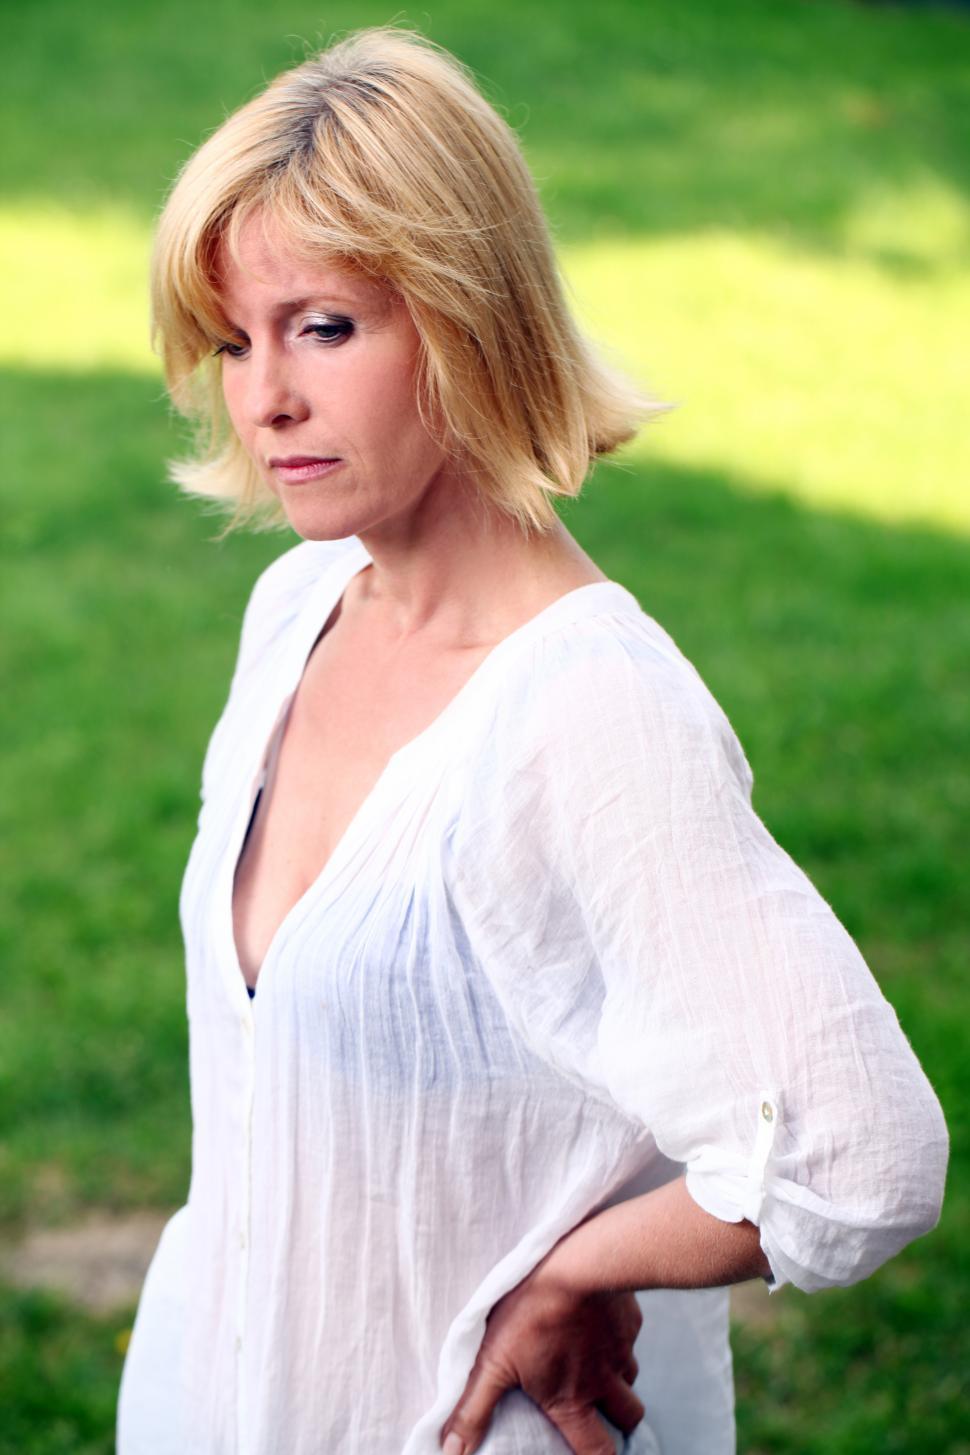 Free Image of Mature woman on the grass in the park 